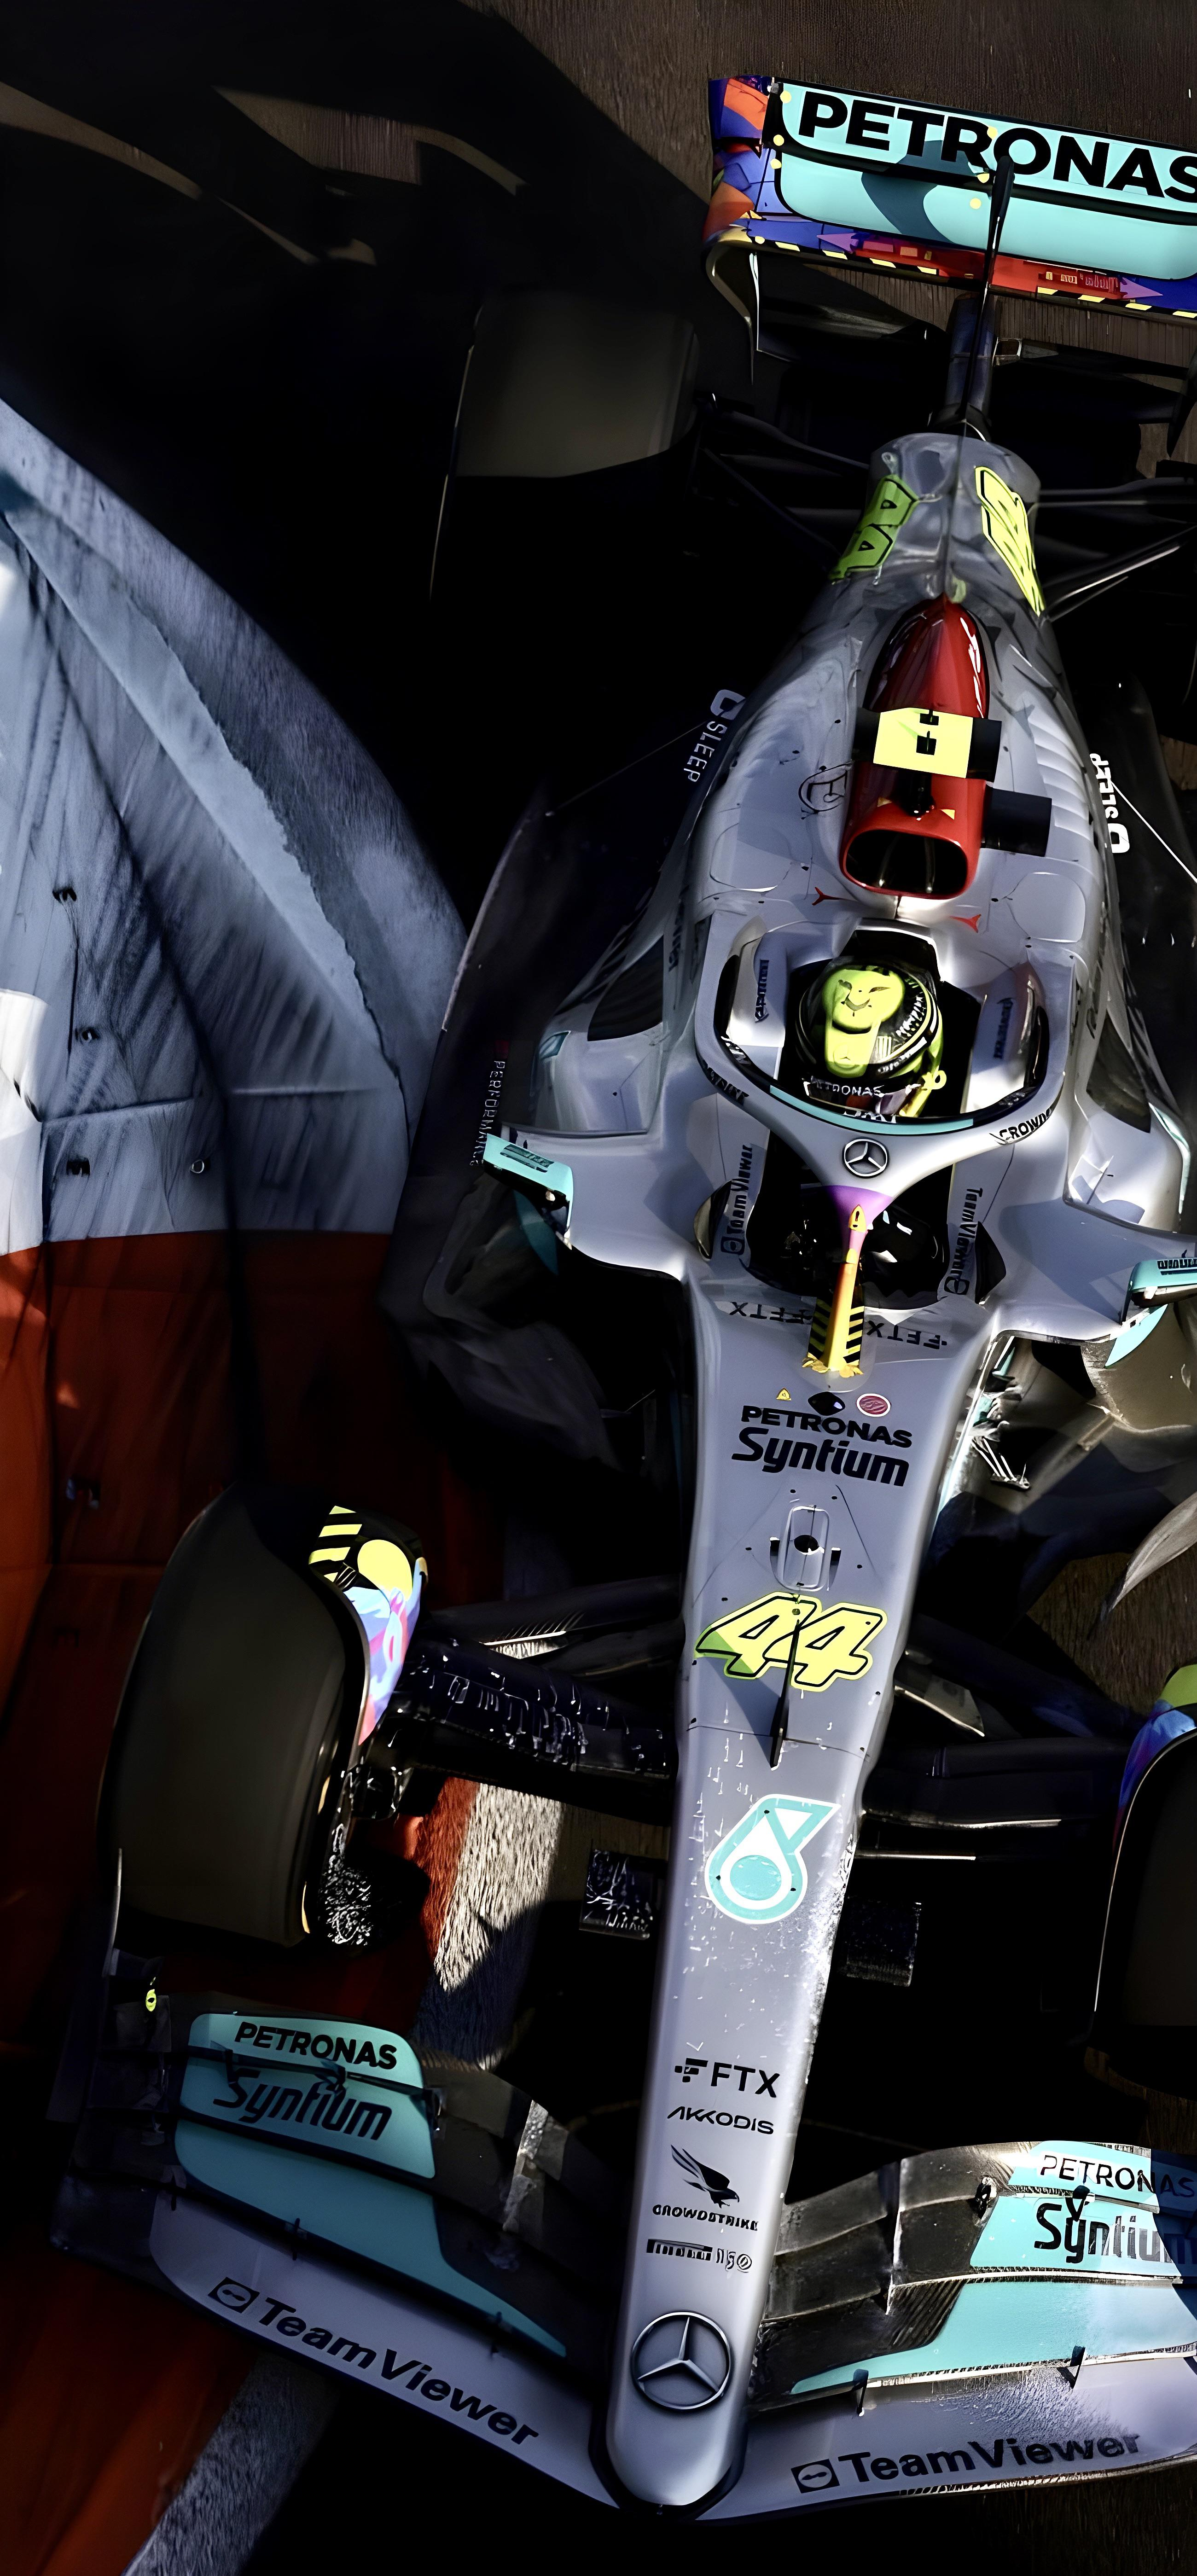 Does Anyone Have Better Wallpaper Please R Lewishamilton